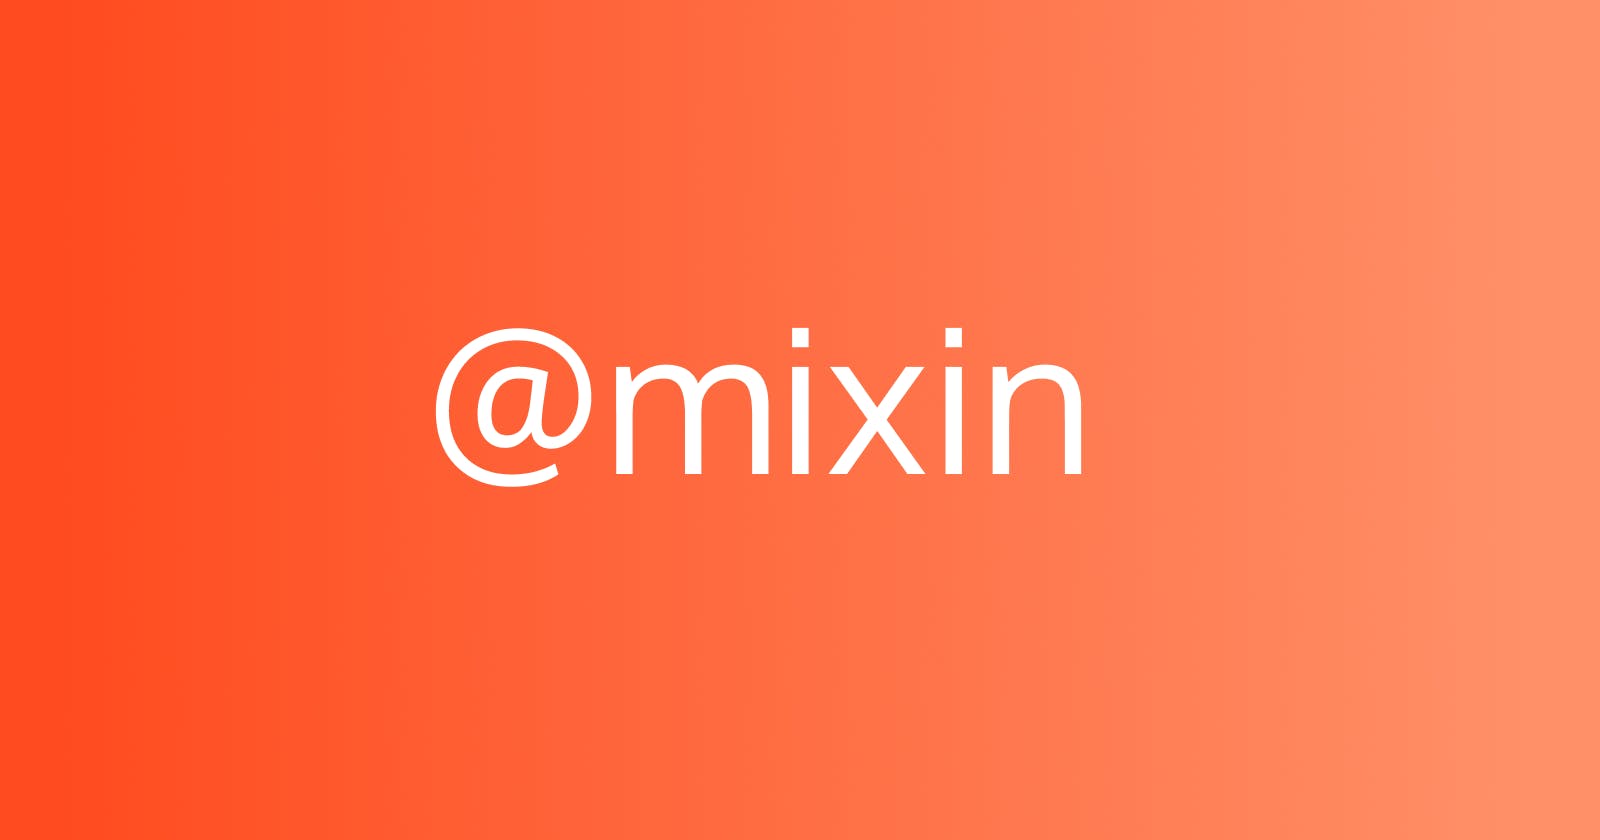 How to use mixins - Part 1